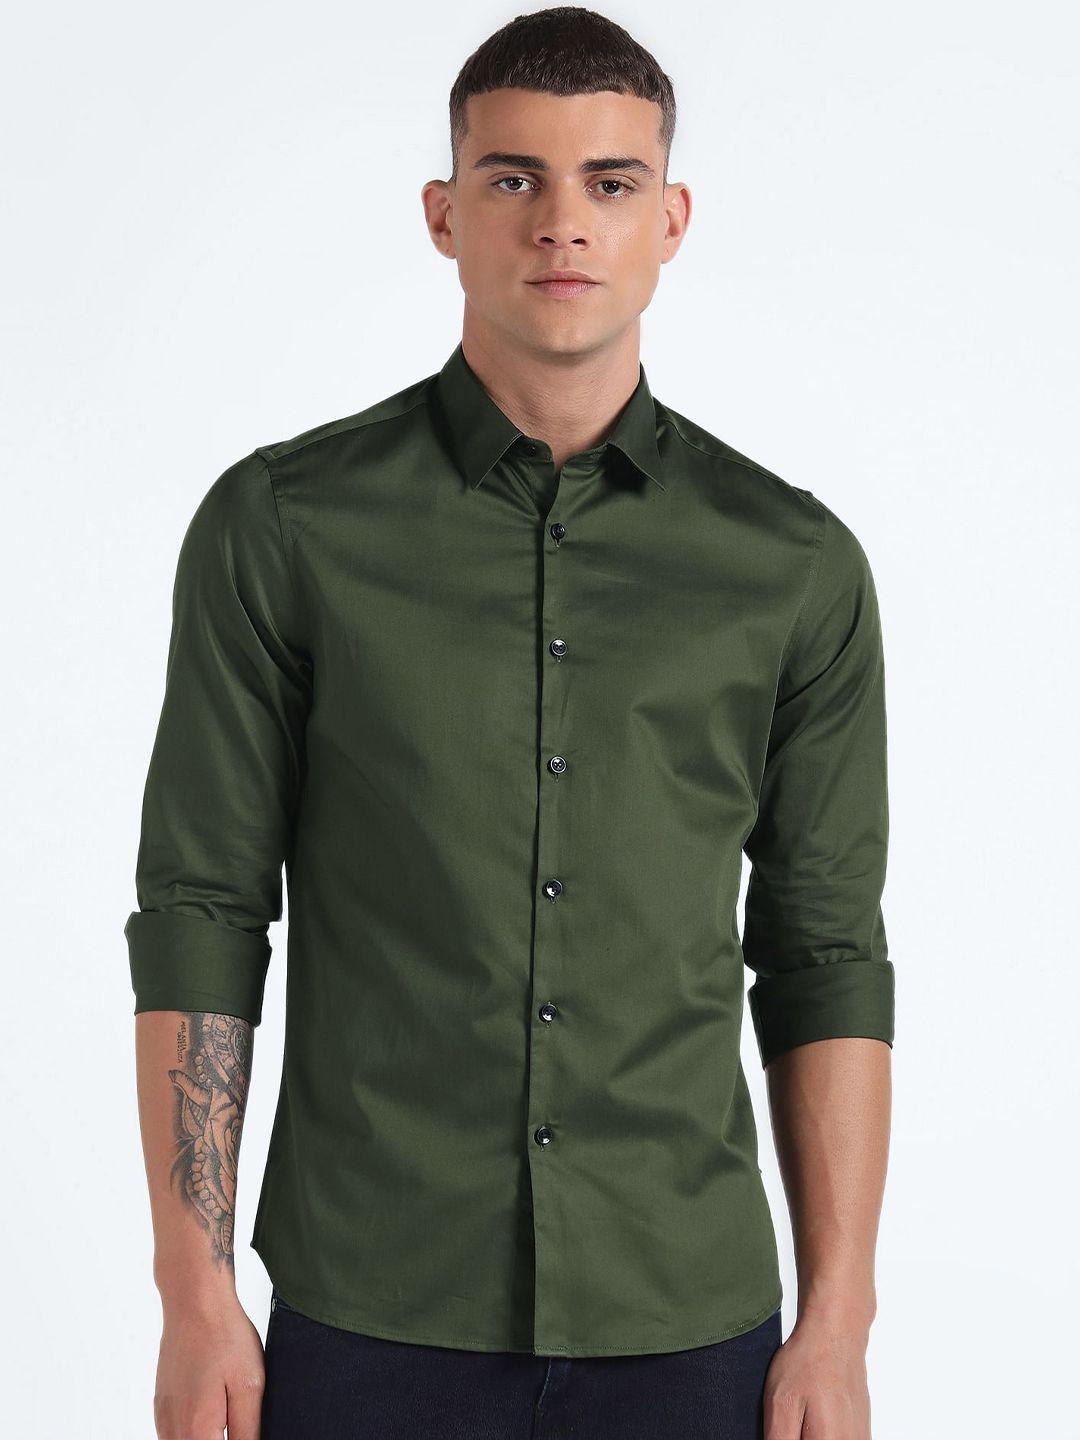 flying-machine-slim-fit-spread-collar-cotton-casual-shirt